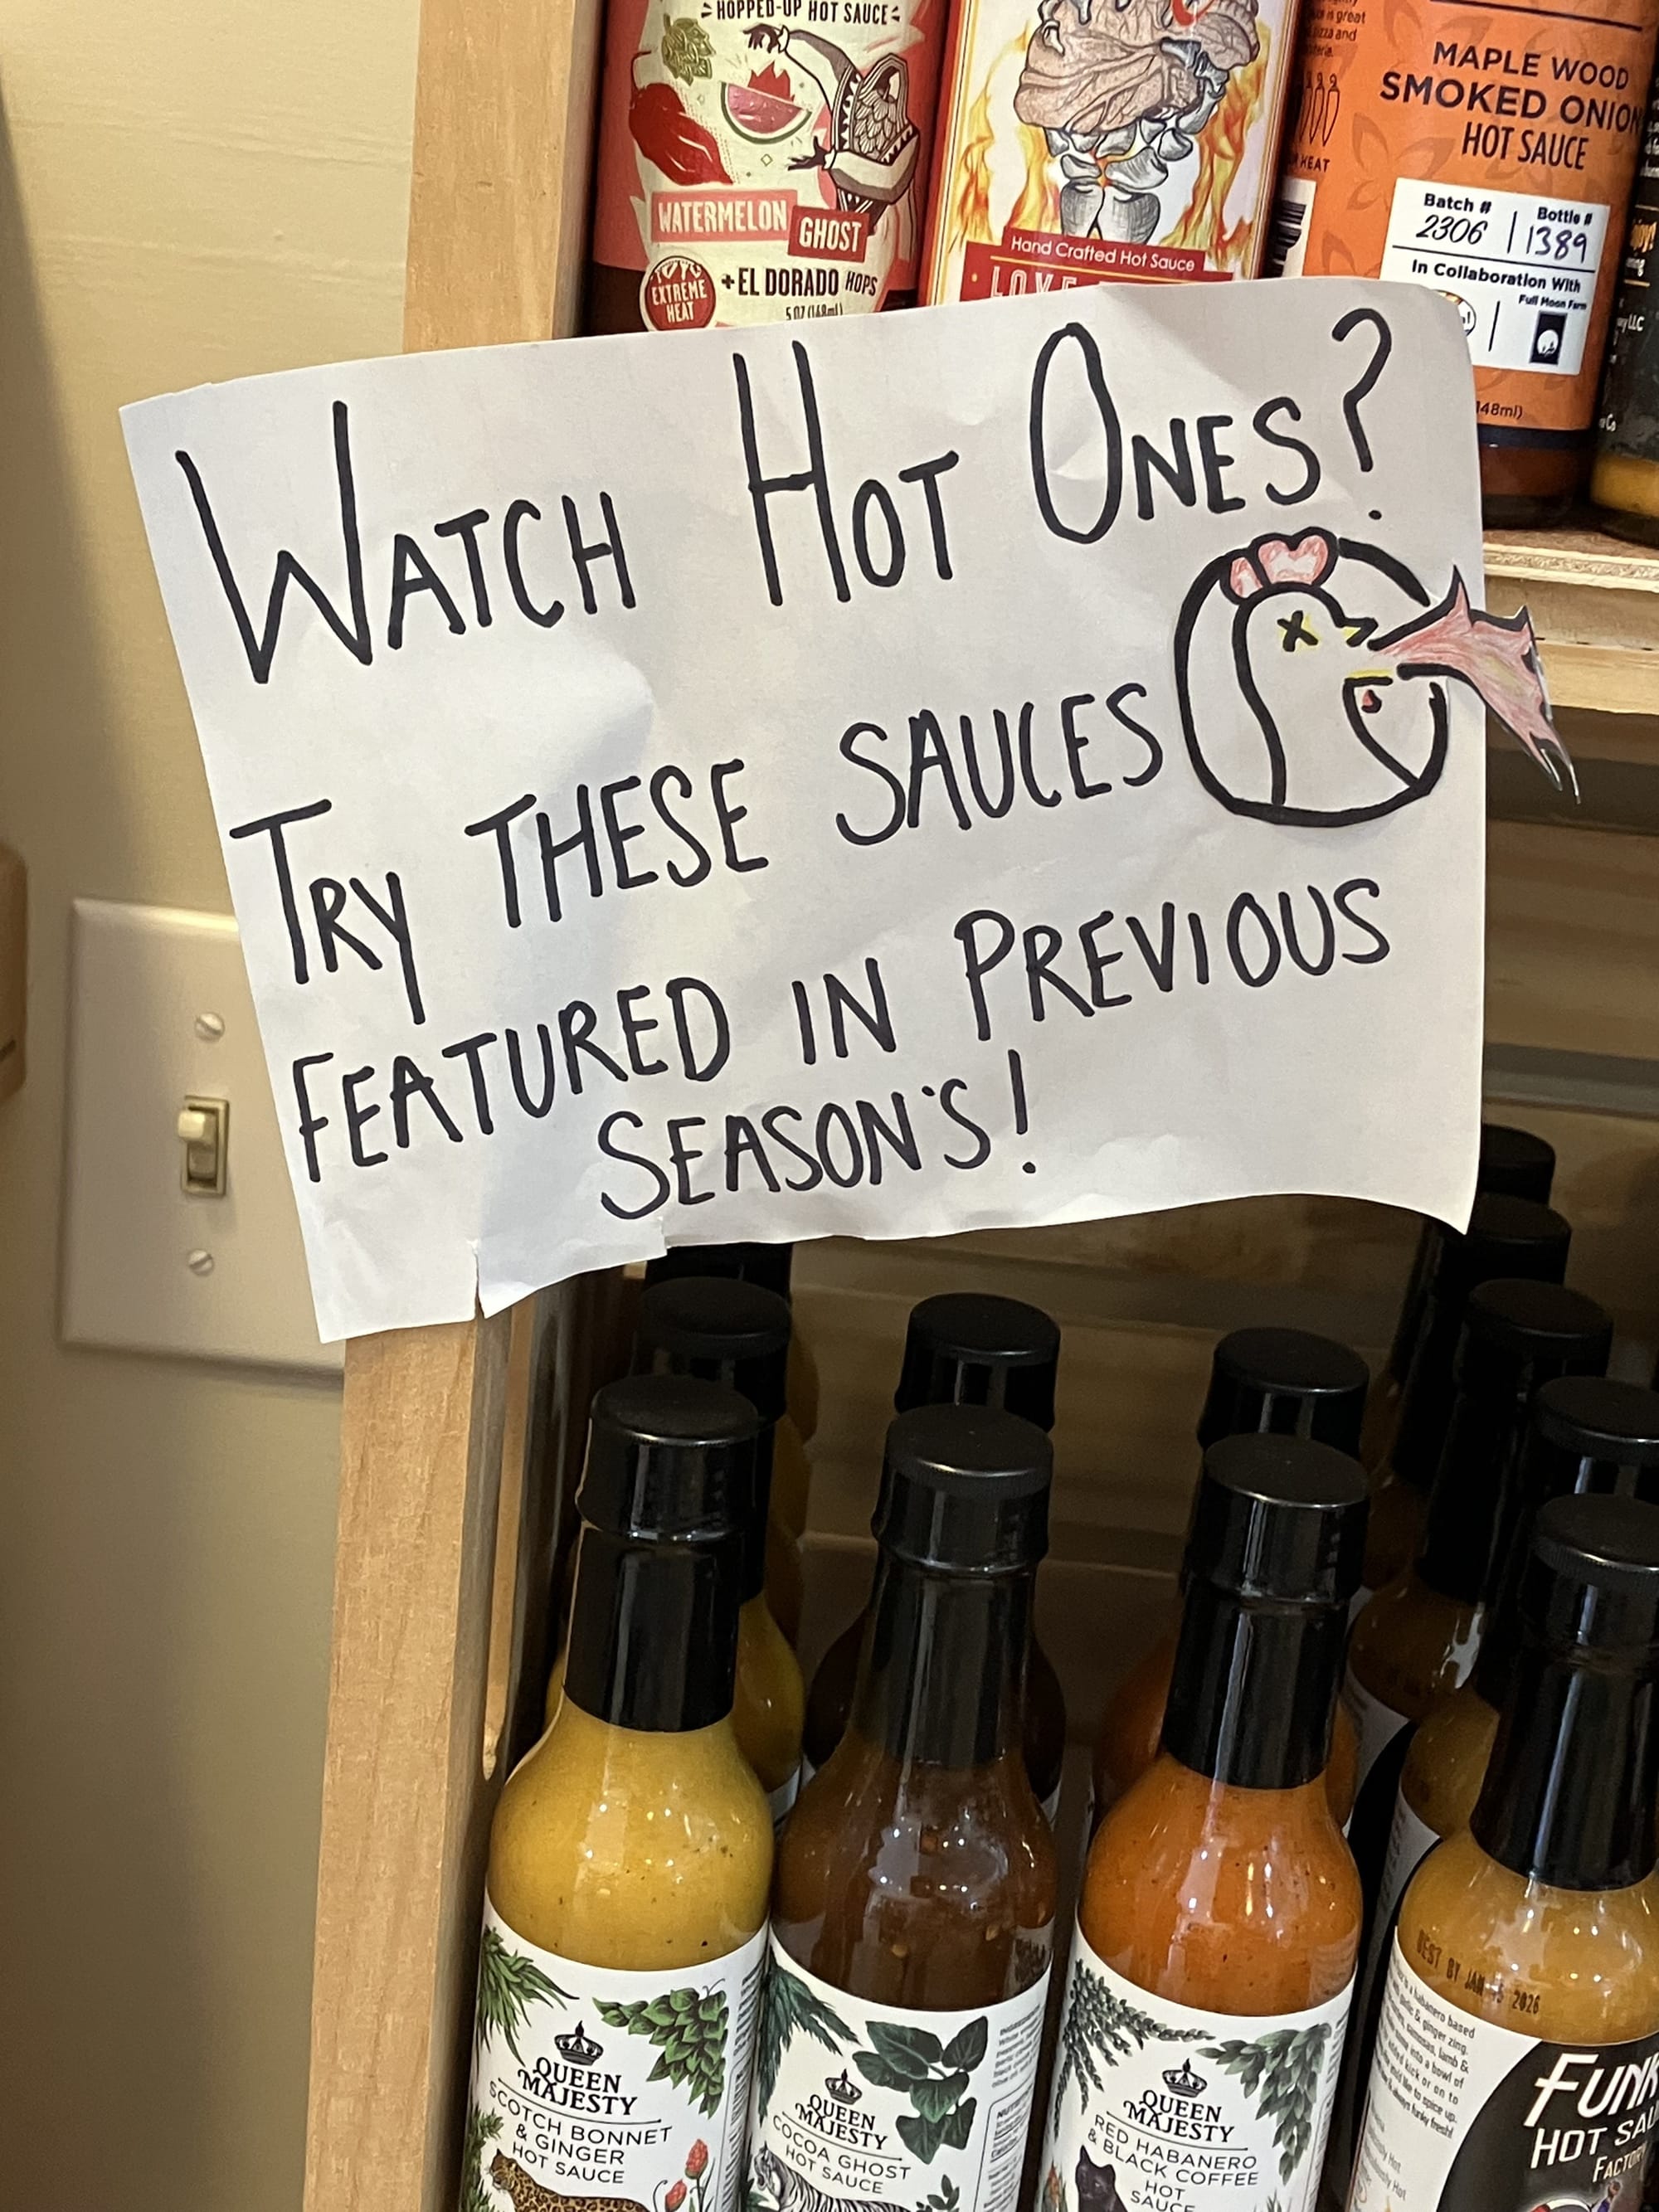 There’s a lot of heat at Winchester’s House of Hot Sauce